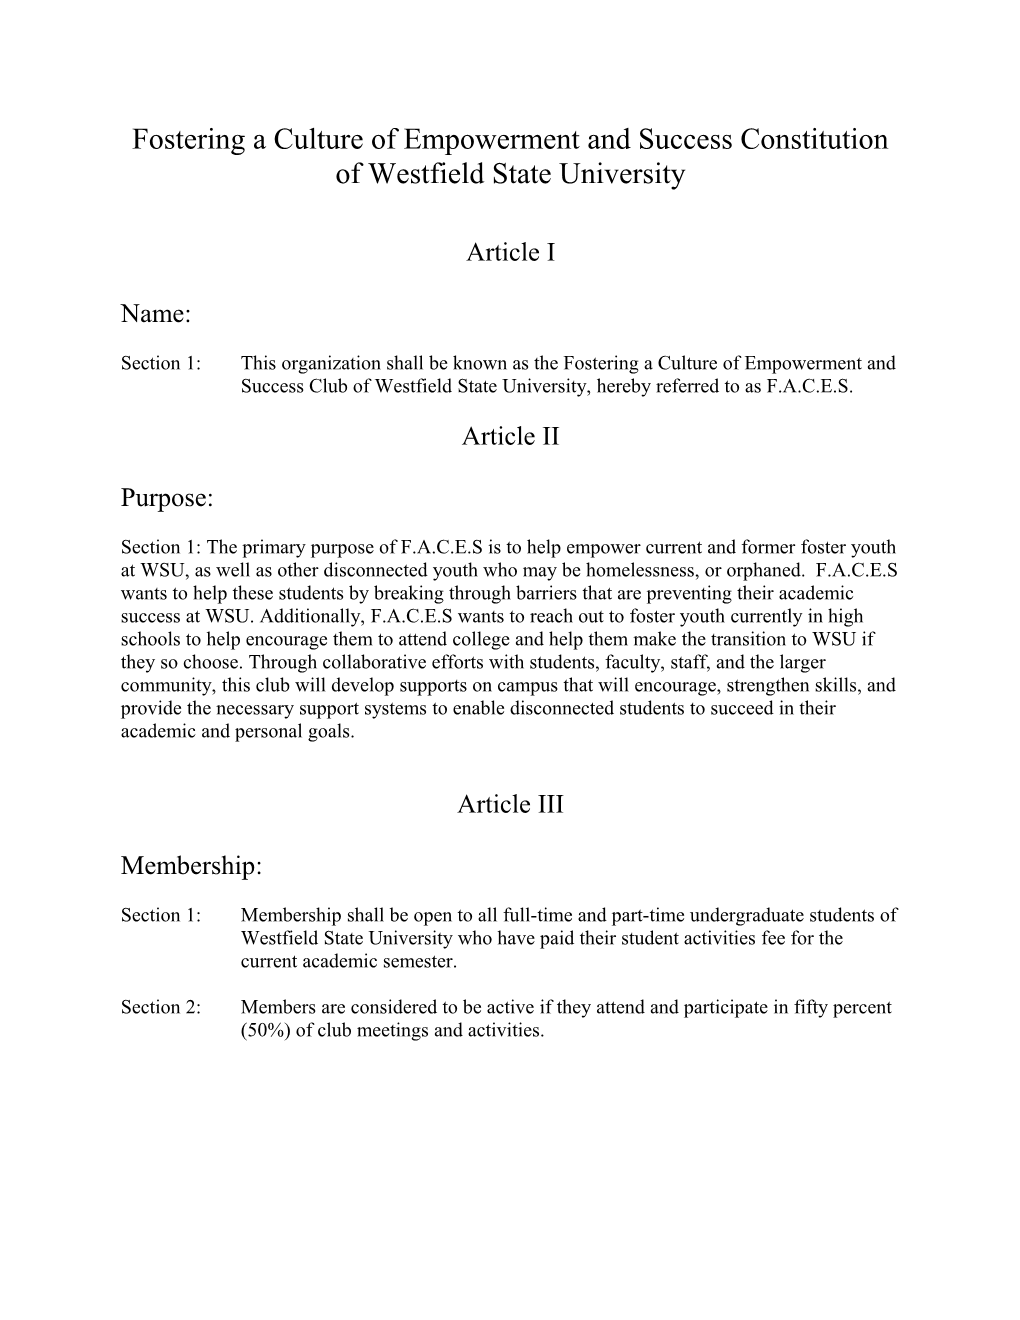 Fostering a Culture of Empowerment and Success Constitution of Westfield State University